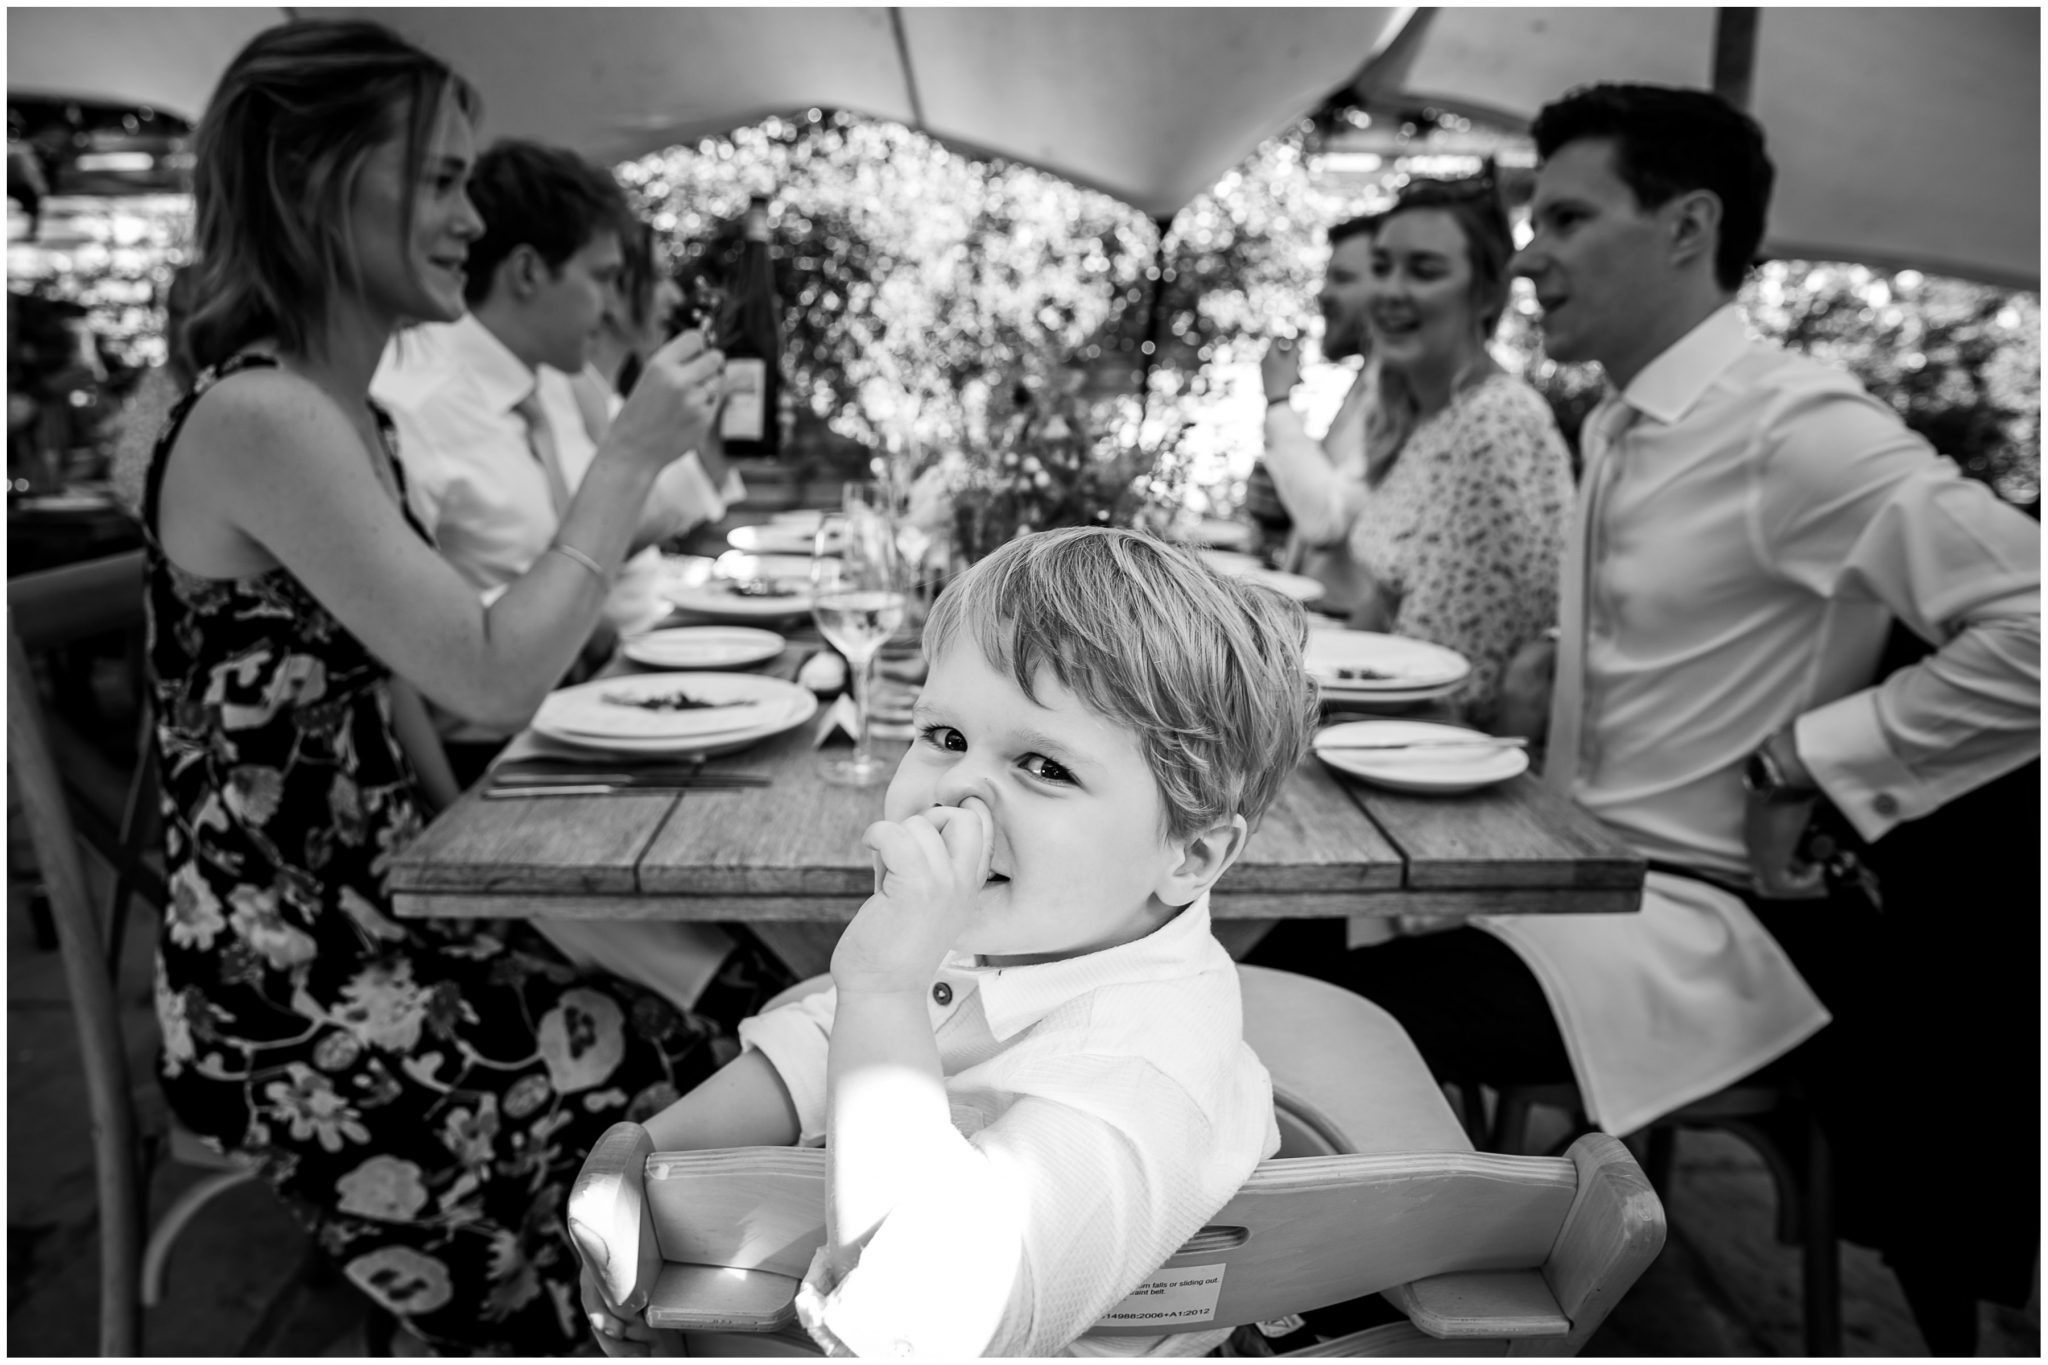 Candid black and white wedding photography with children